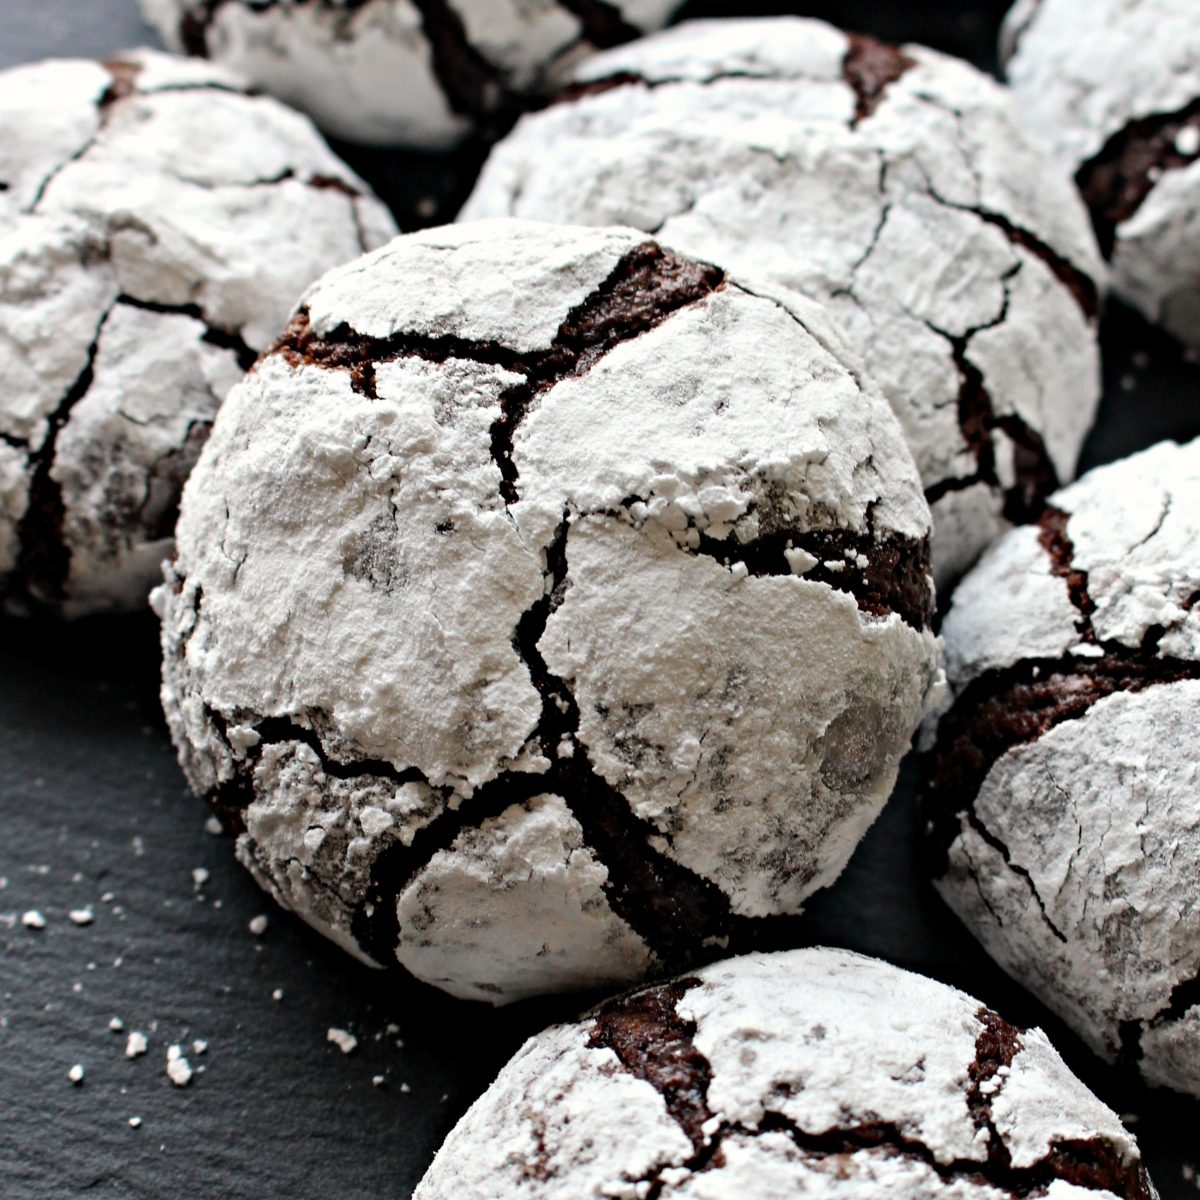 Closeup of Chocolate Crinkle Cookie coated in confectioners sugar with chocolate showing through the cracks.